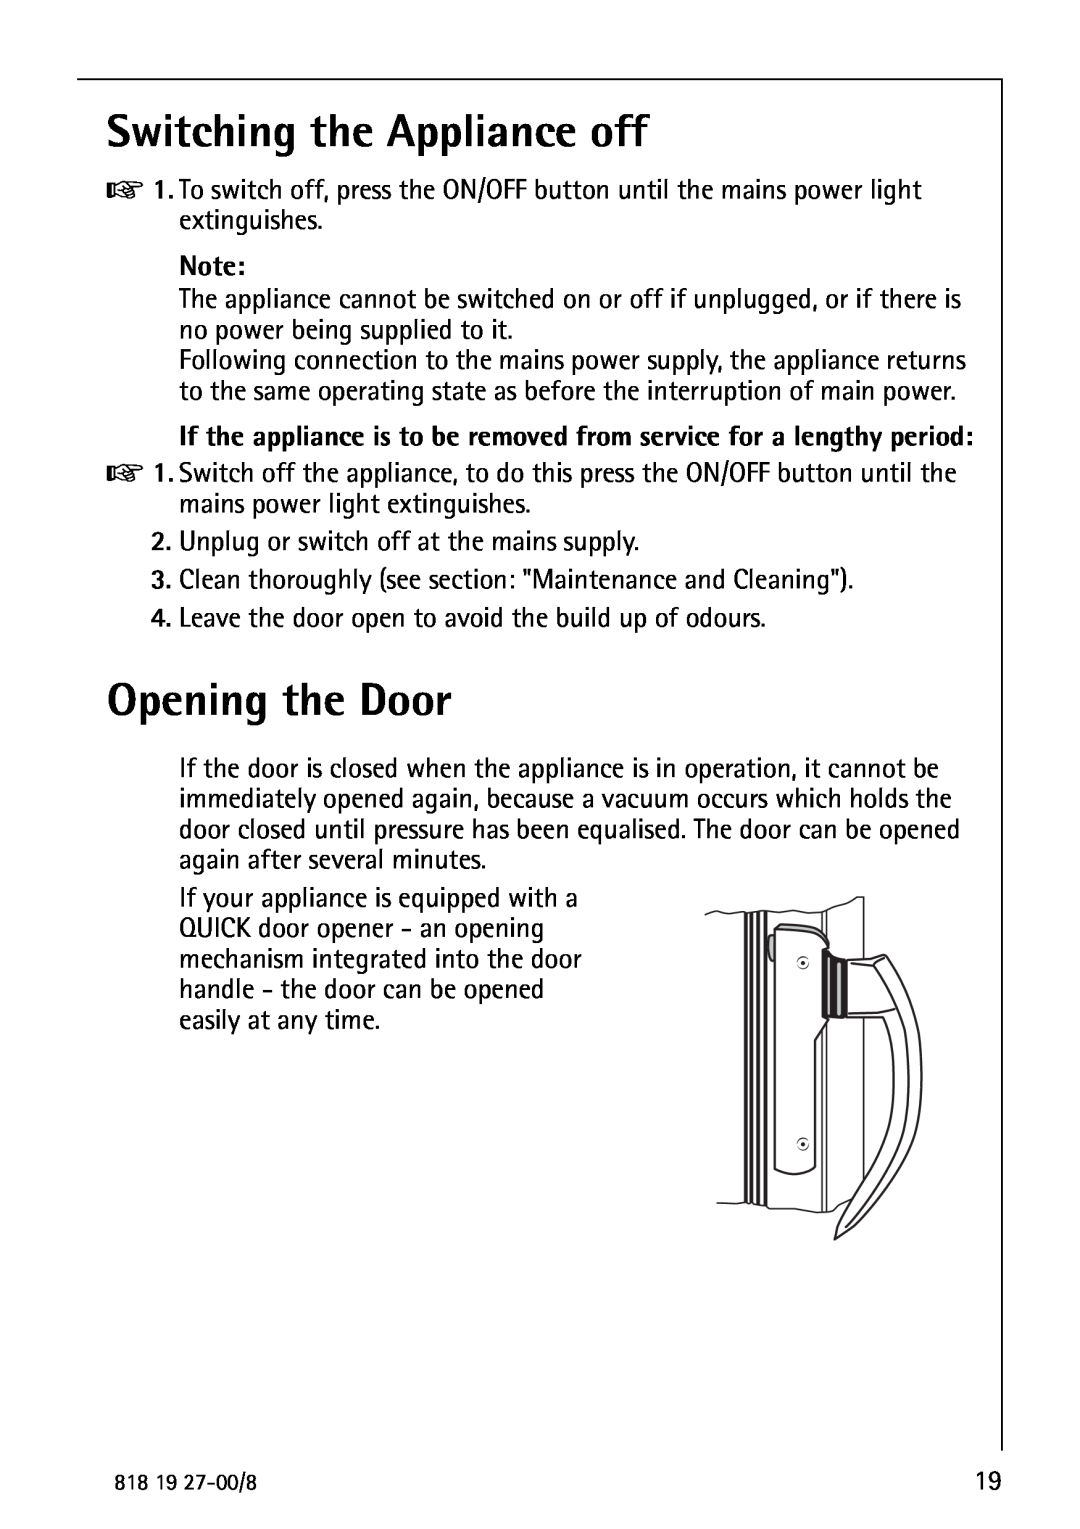 Electrolux Upright Refrigerator manual Switching the Appliance off, Opening the Door 